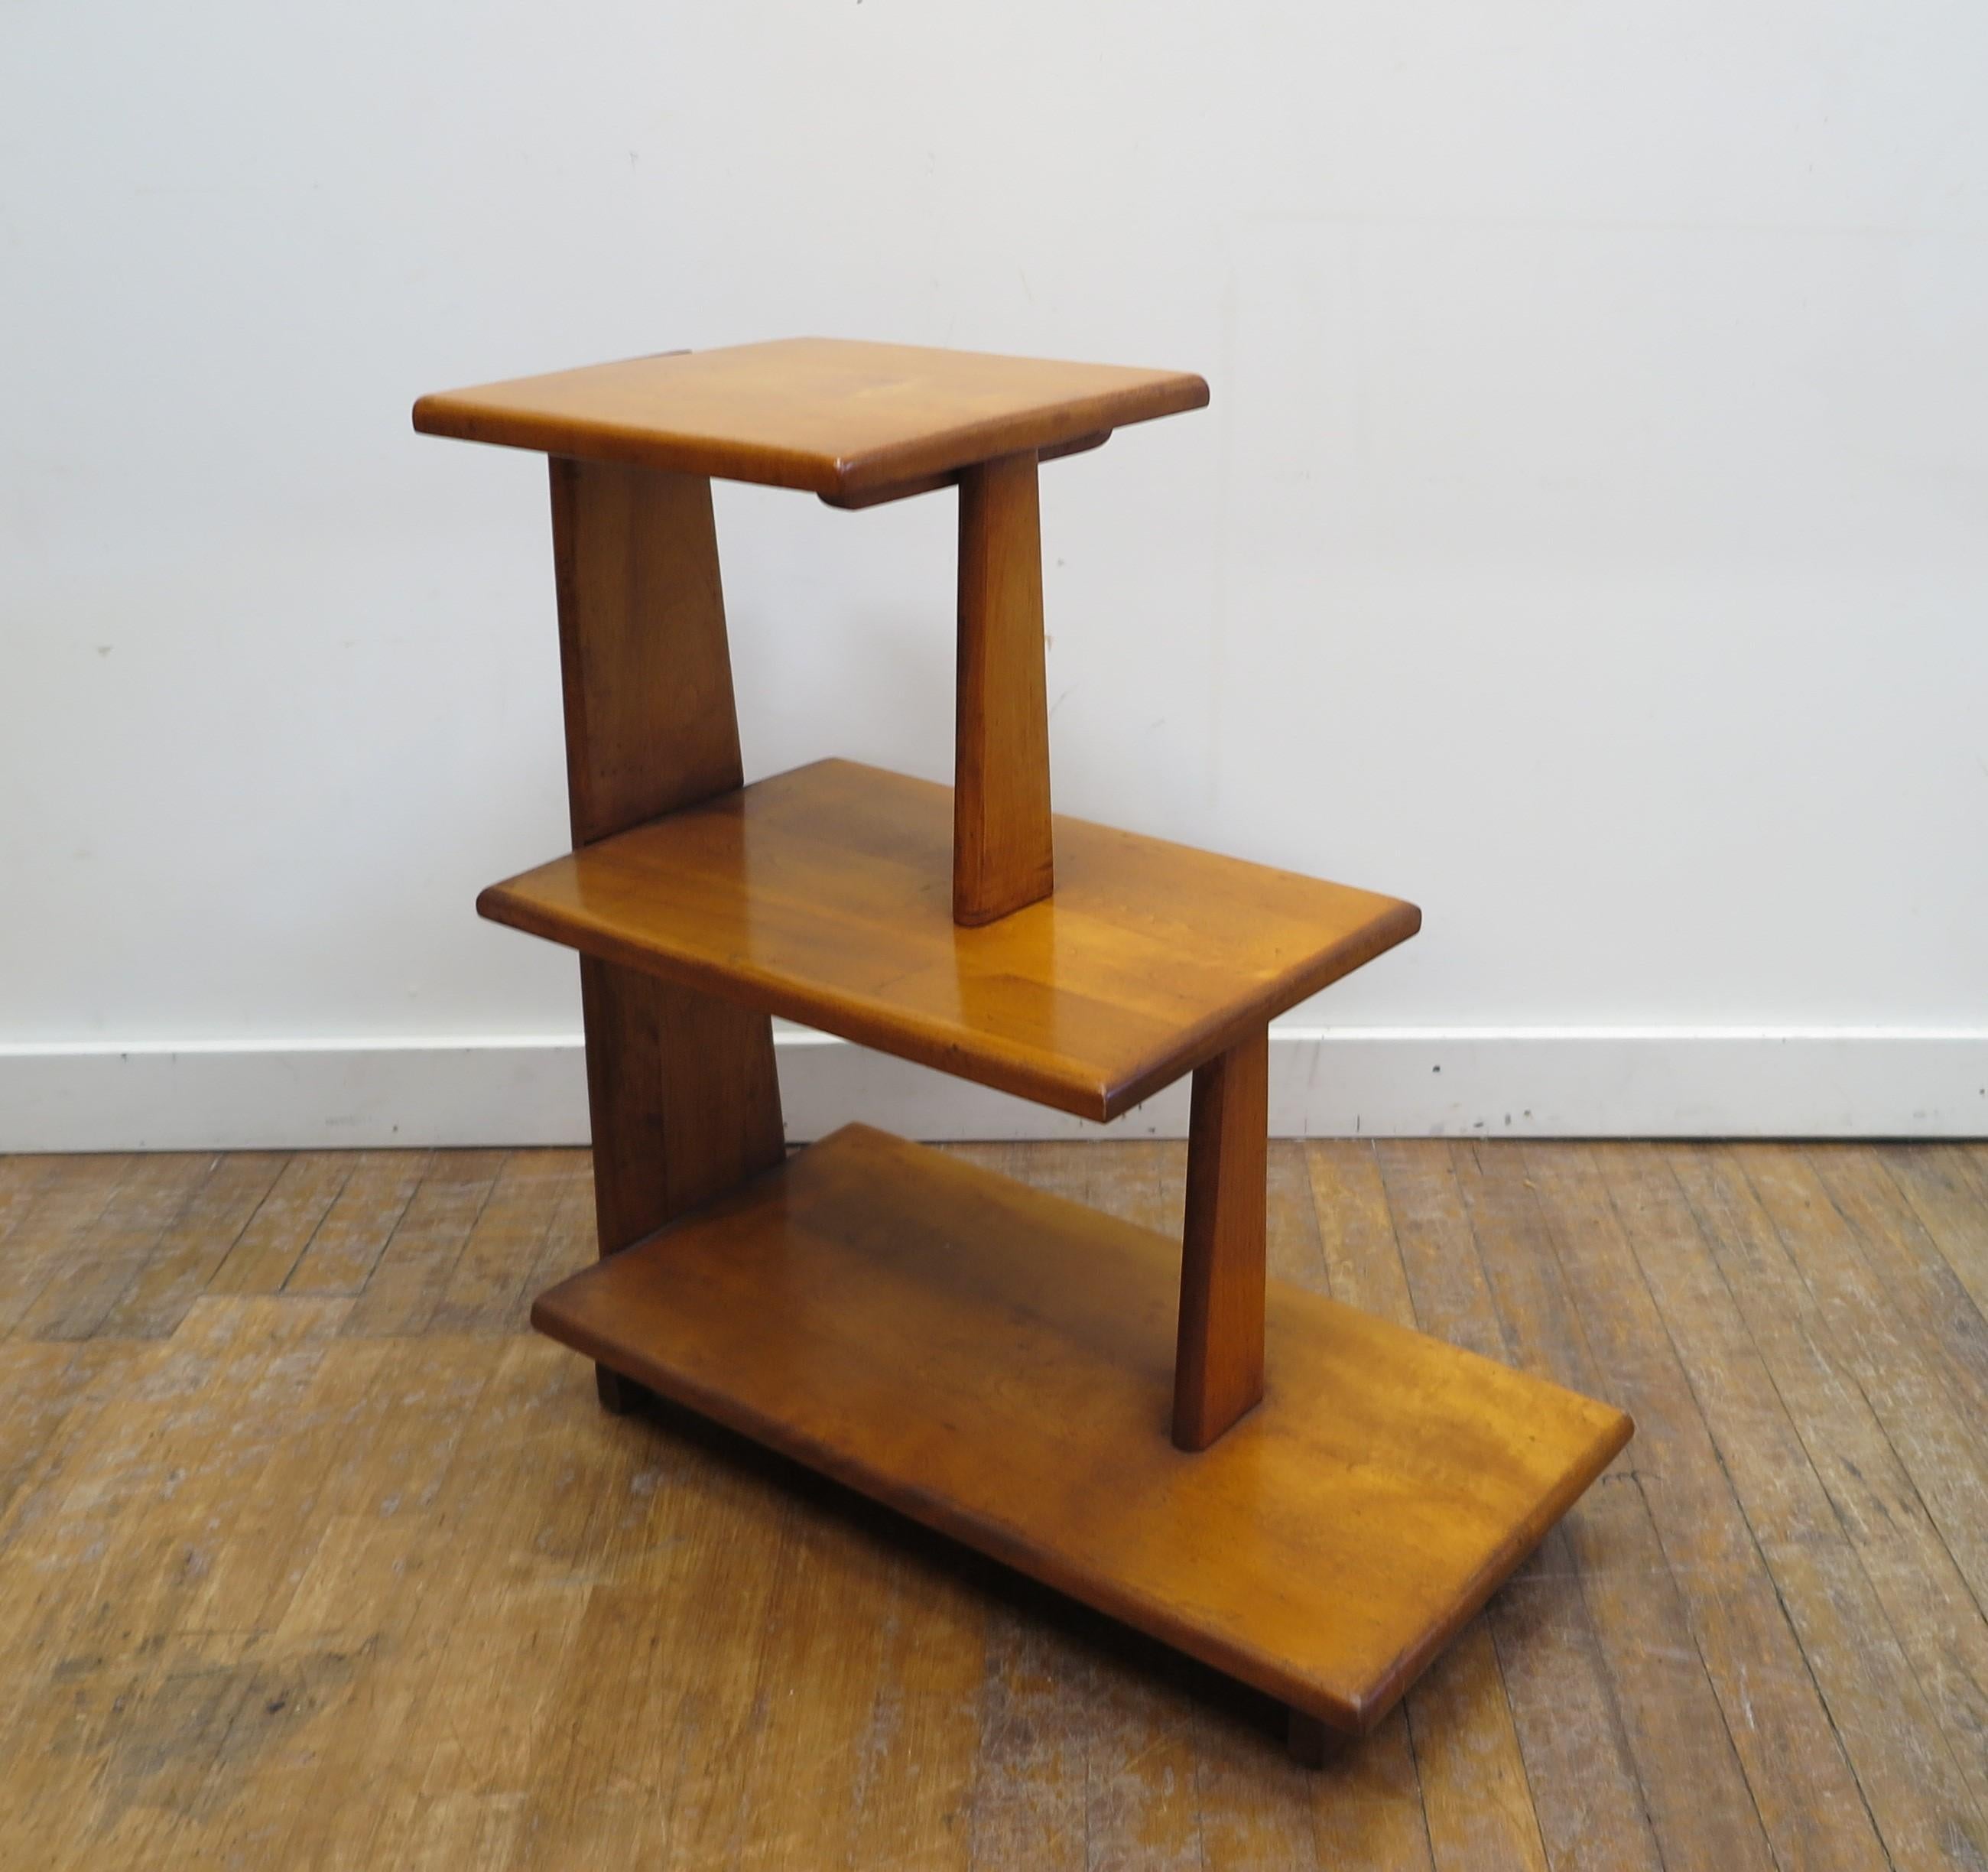 Mid Century Modernist step table. Modernist side table with three shelves made of Maple. Simple elegant and modern. In very good original condition. 1940's American.